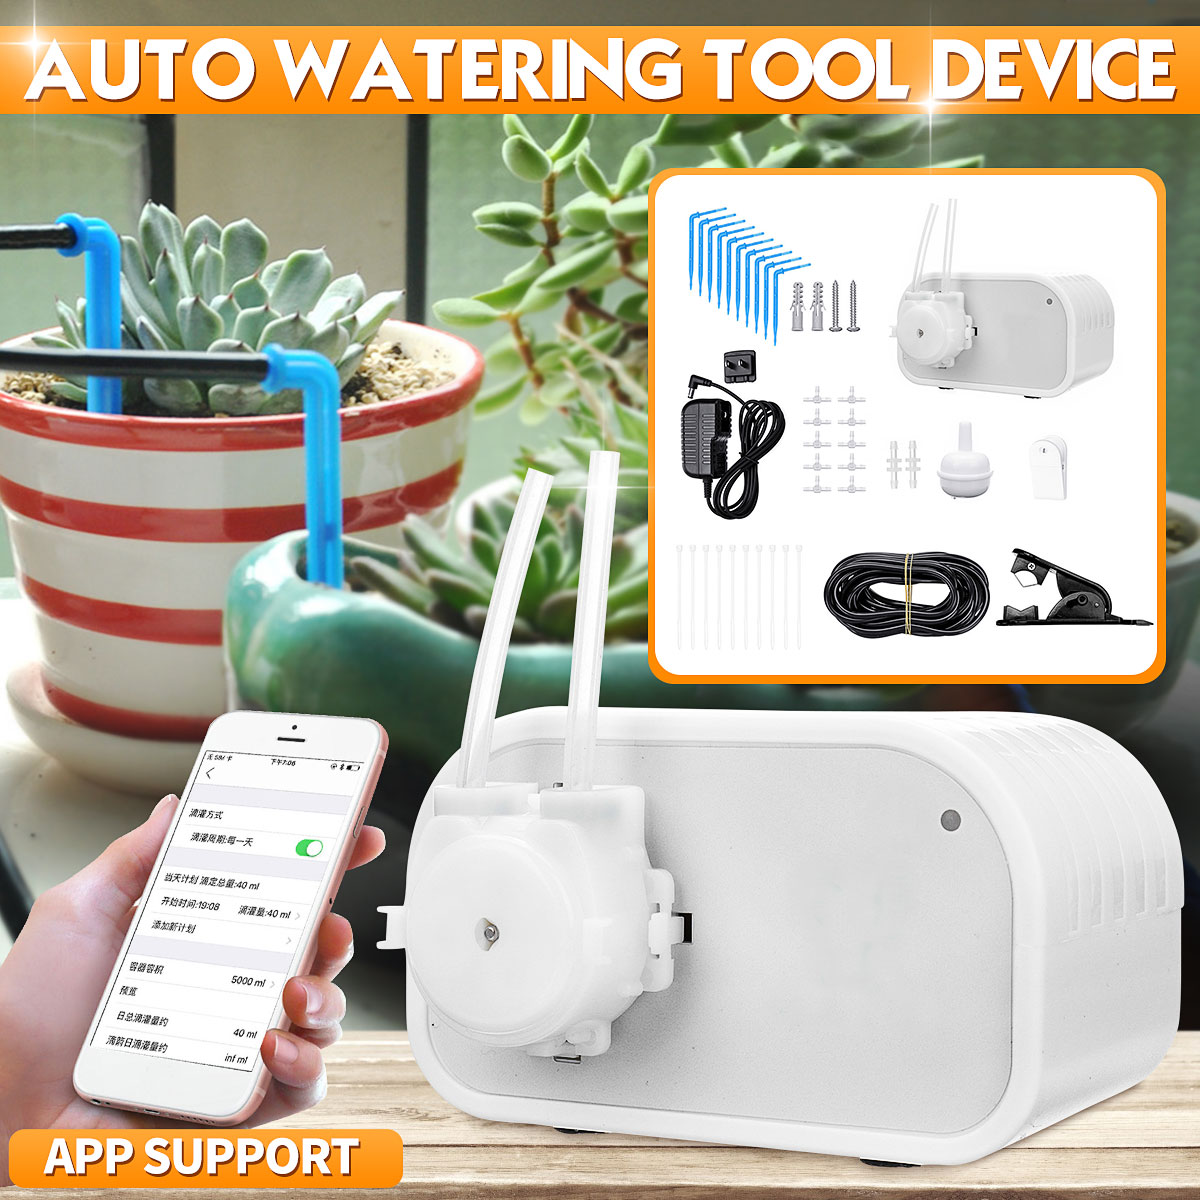 Intelligent-Watering-Device-Mobile-Phone-Control-Automatic-Drip-Irrigation-Kit-Garden-Potted-Plant-1707572-1